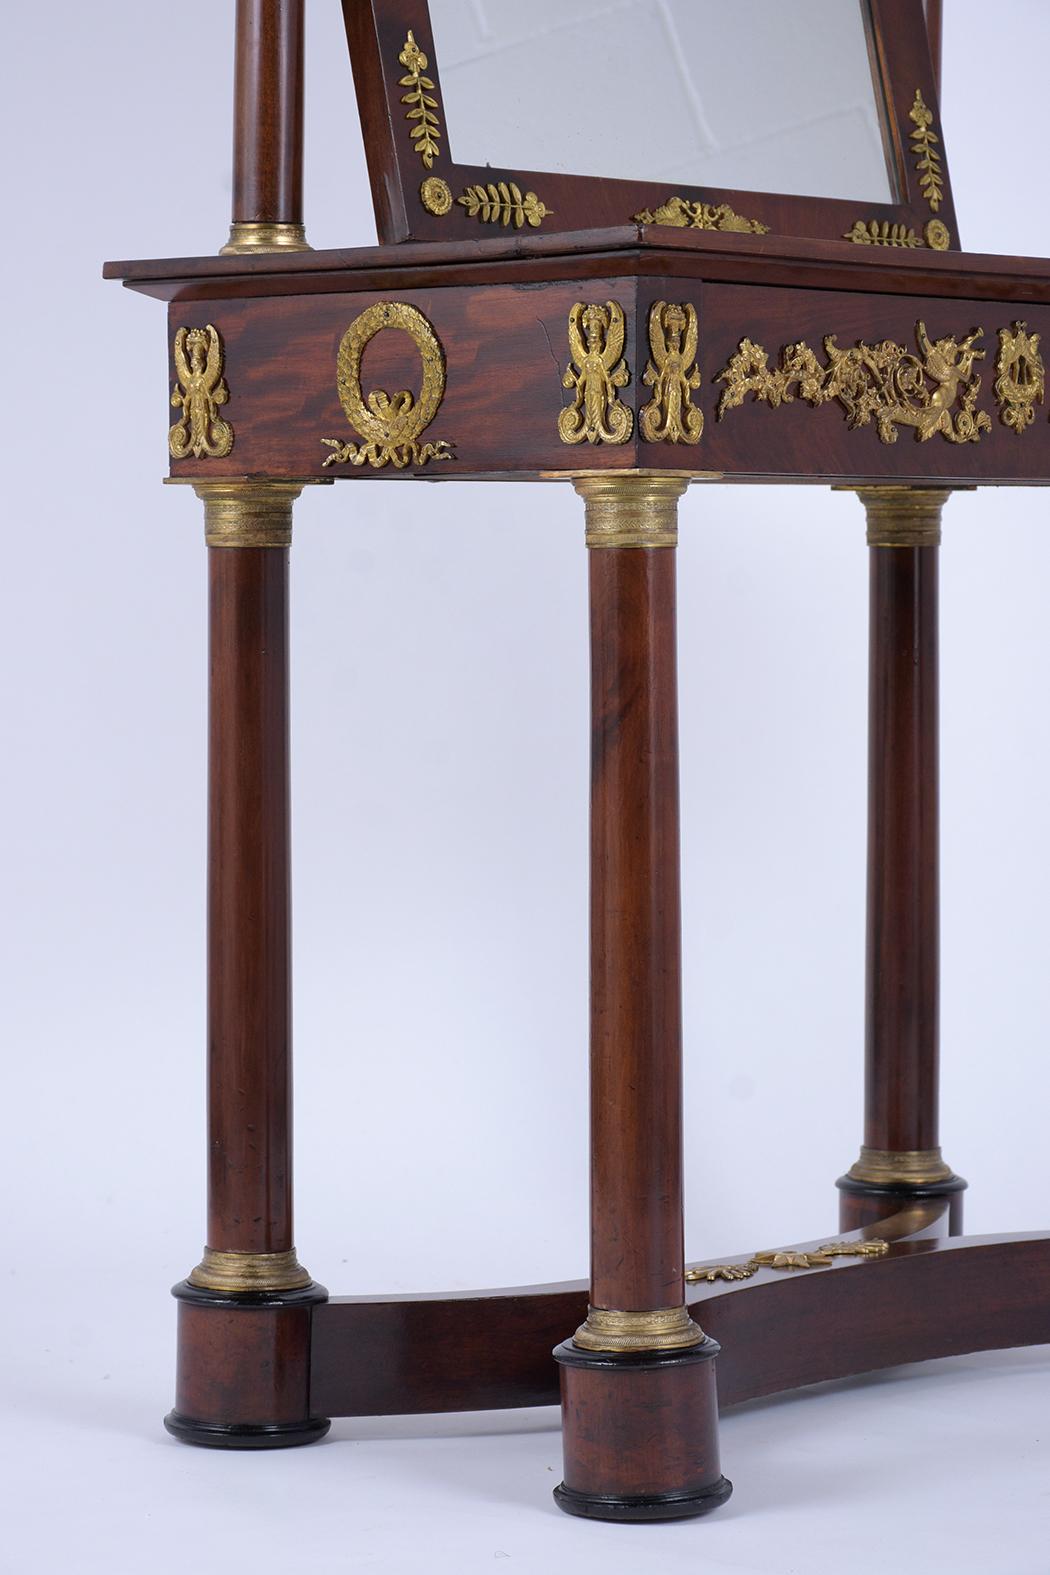 1840s French Empire Mahogany Vanity Table with Arched Mirror & Bronze Accents